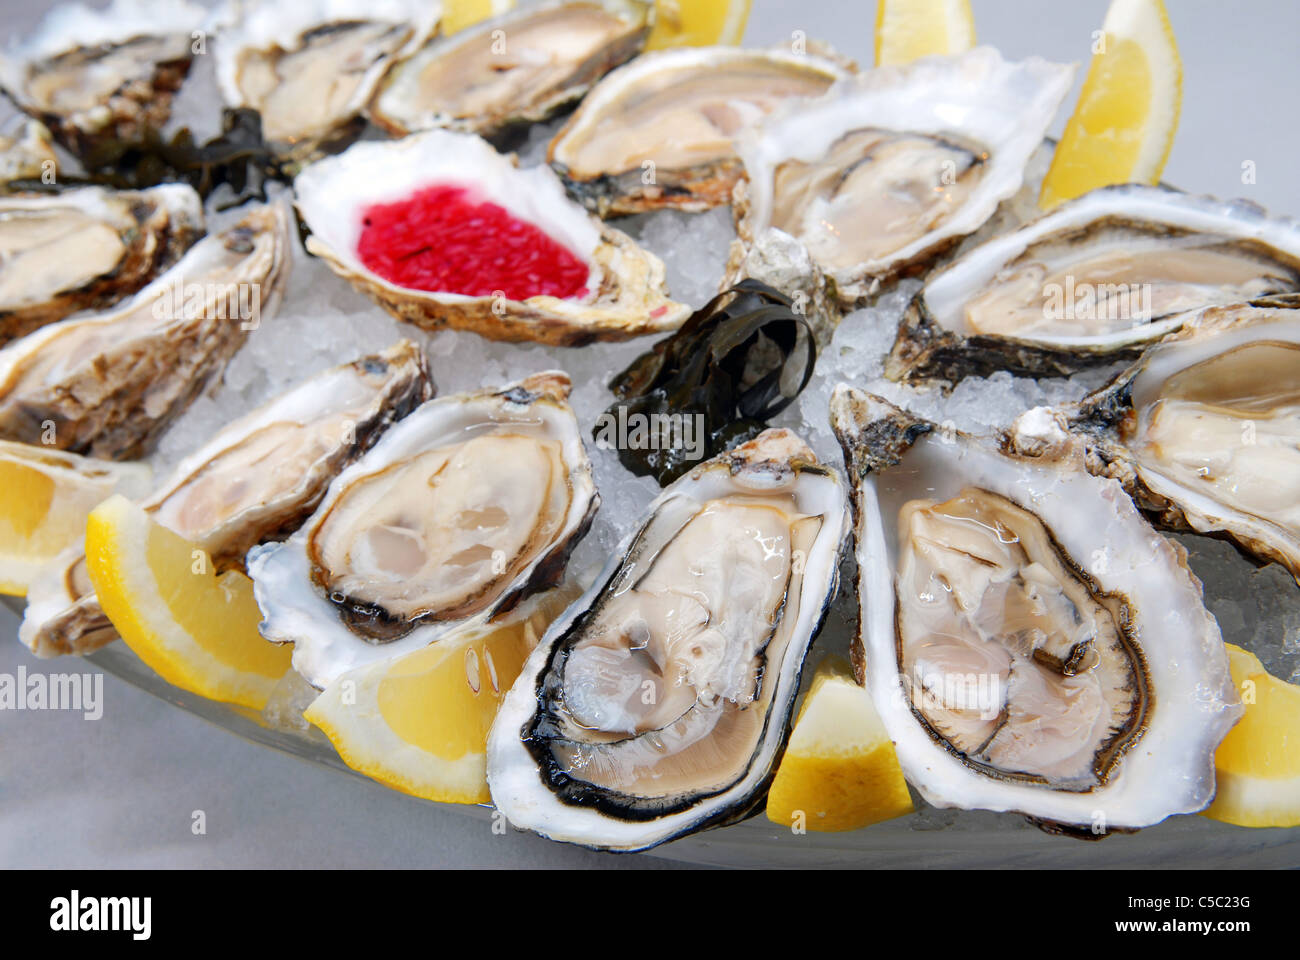 Oysters in ice with a lemon and sauce Stock Photo